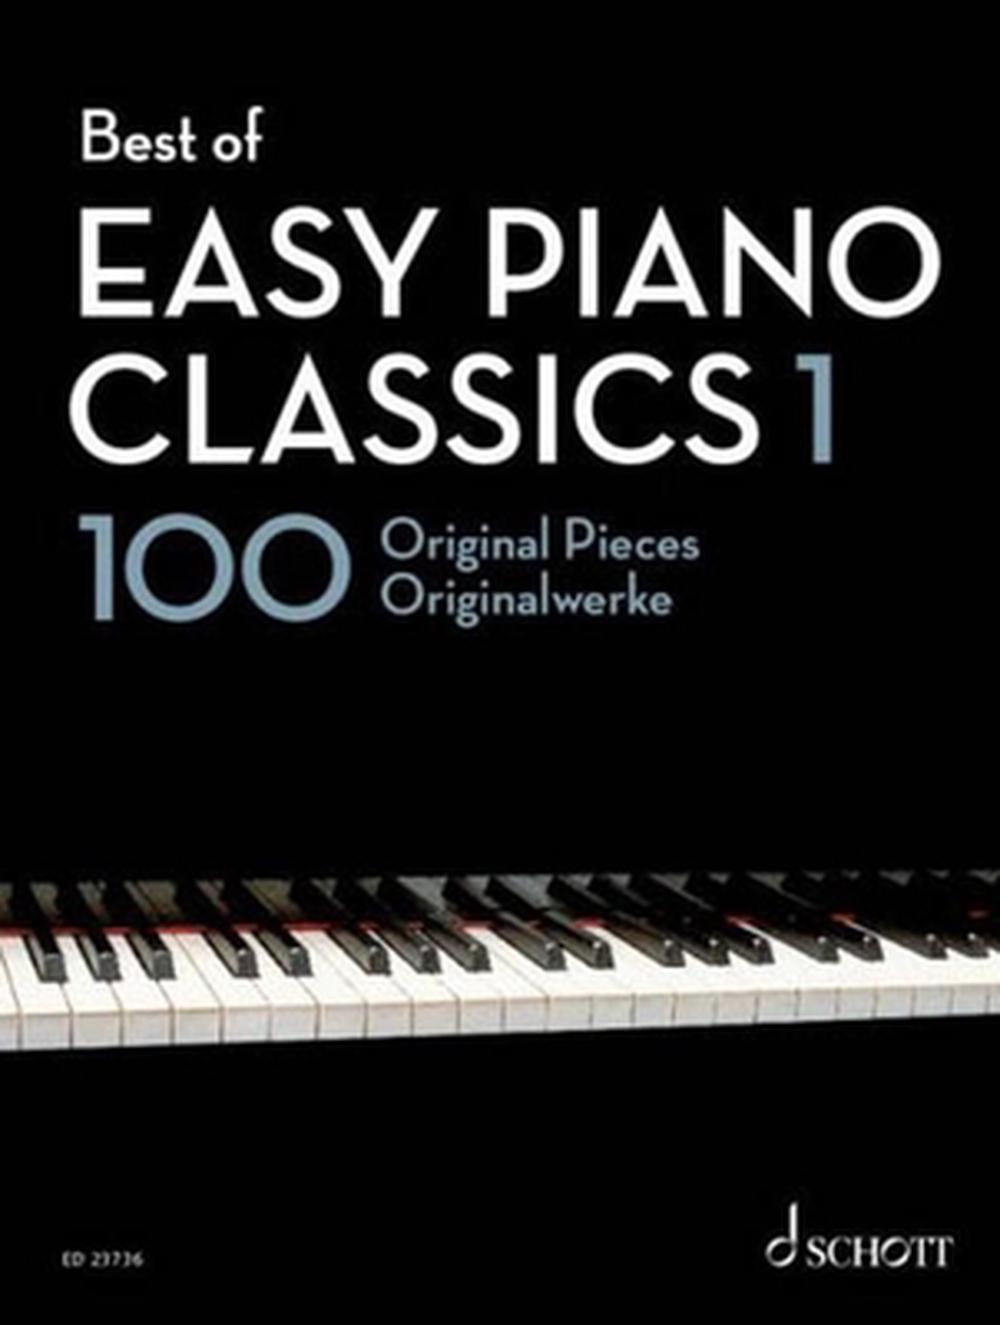 Best of Easy Piano Classics 1: 100 Original Pieces by Hans-G?nter Heumann - Picture 1 of 1